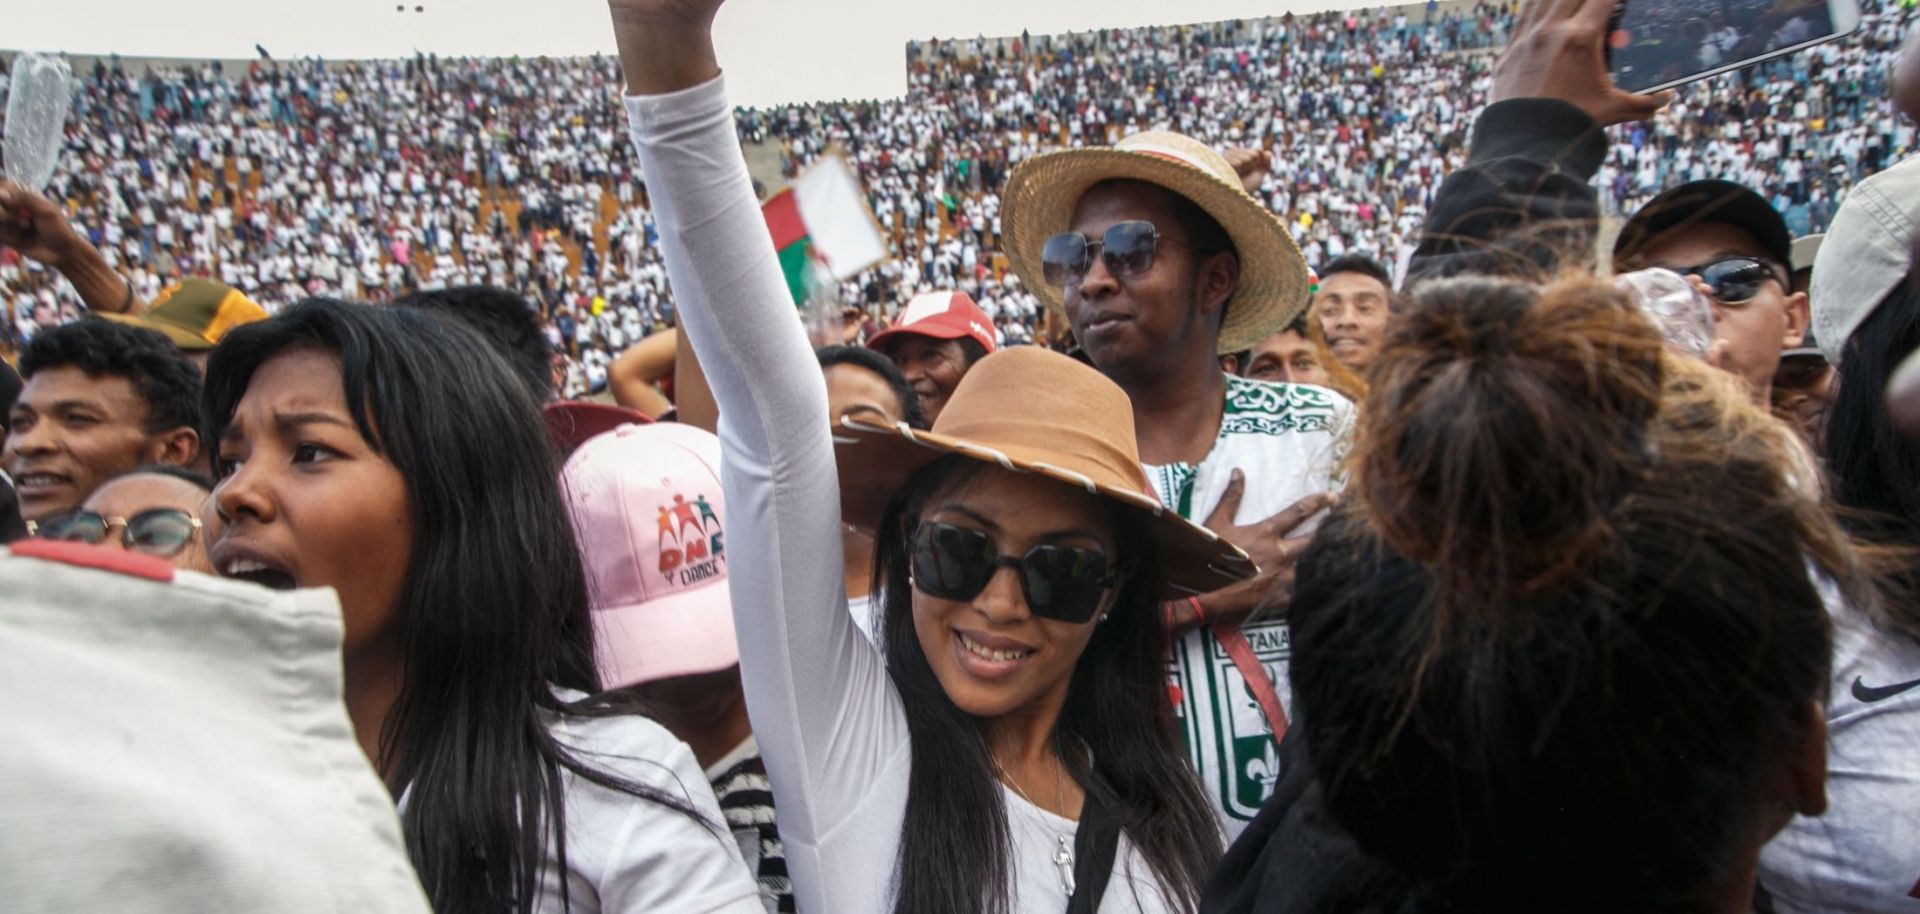 Opposition supporters attend a rally in Antananarivo, Madagascar, on Oct. 21, 2023, ahead of the country’s Nov. 16 presidential election.